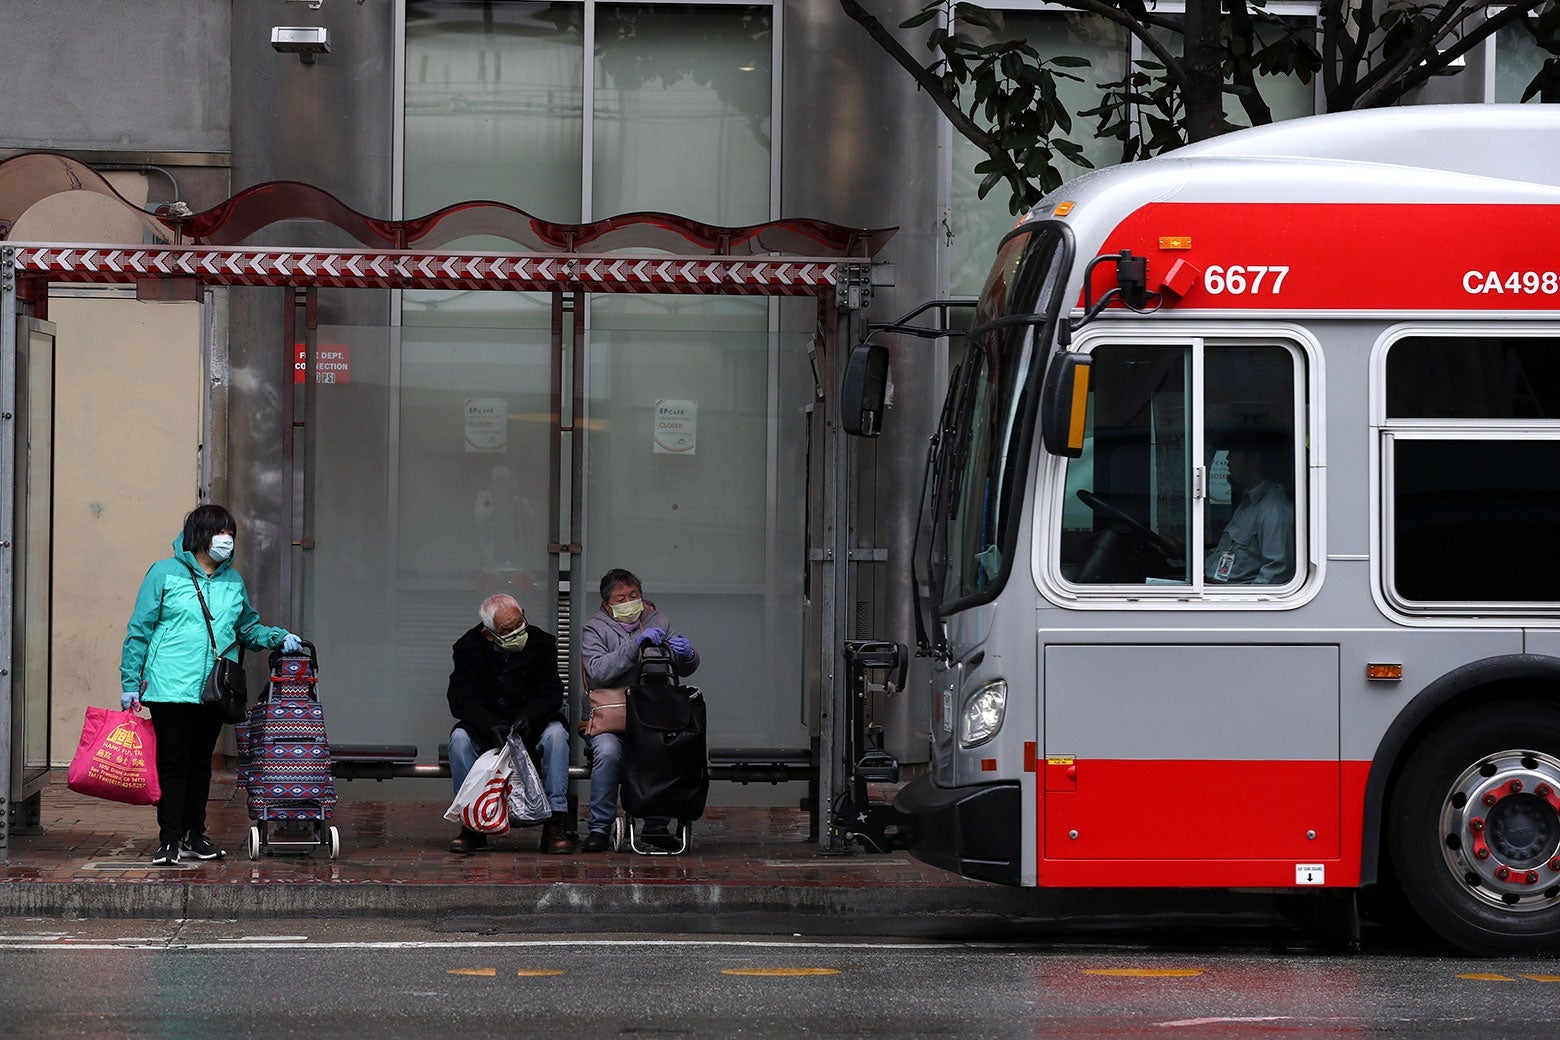 Riders, in face masks, wait for a MUNI bus as it pulls into a stop in San Francisco. Looks like a gray day.